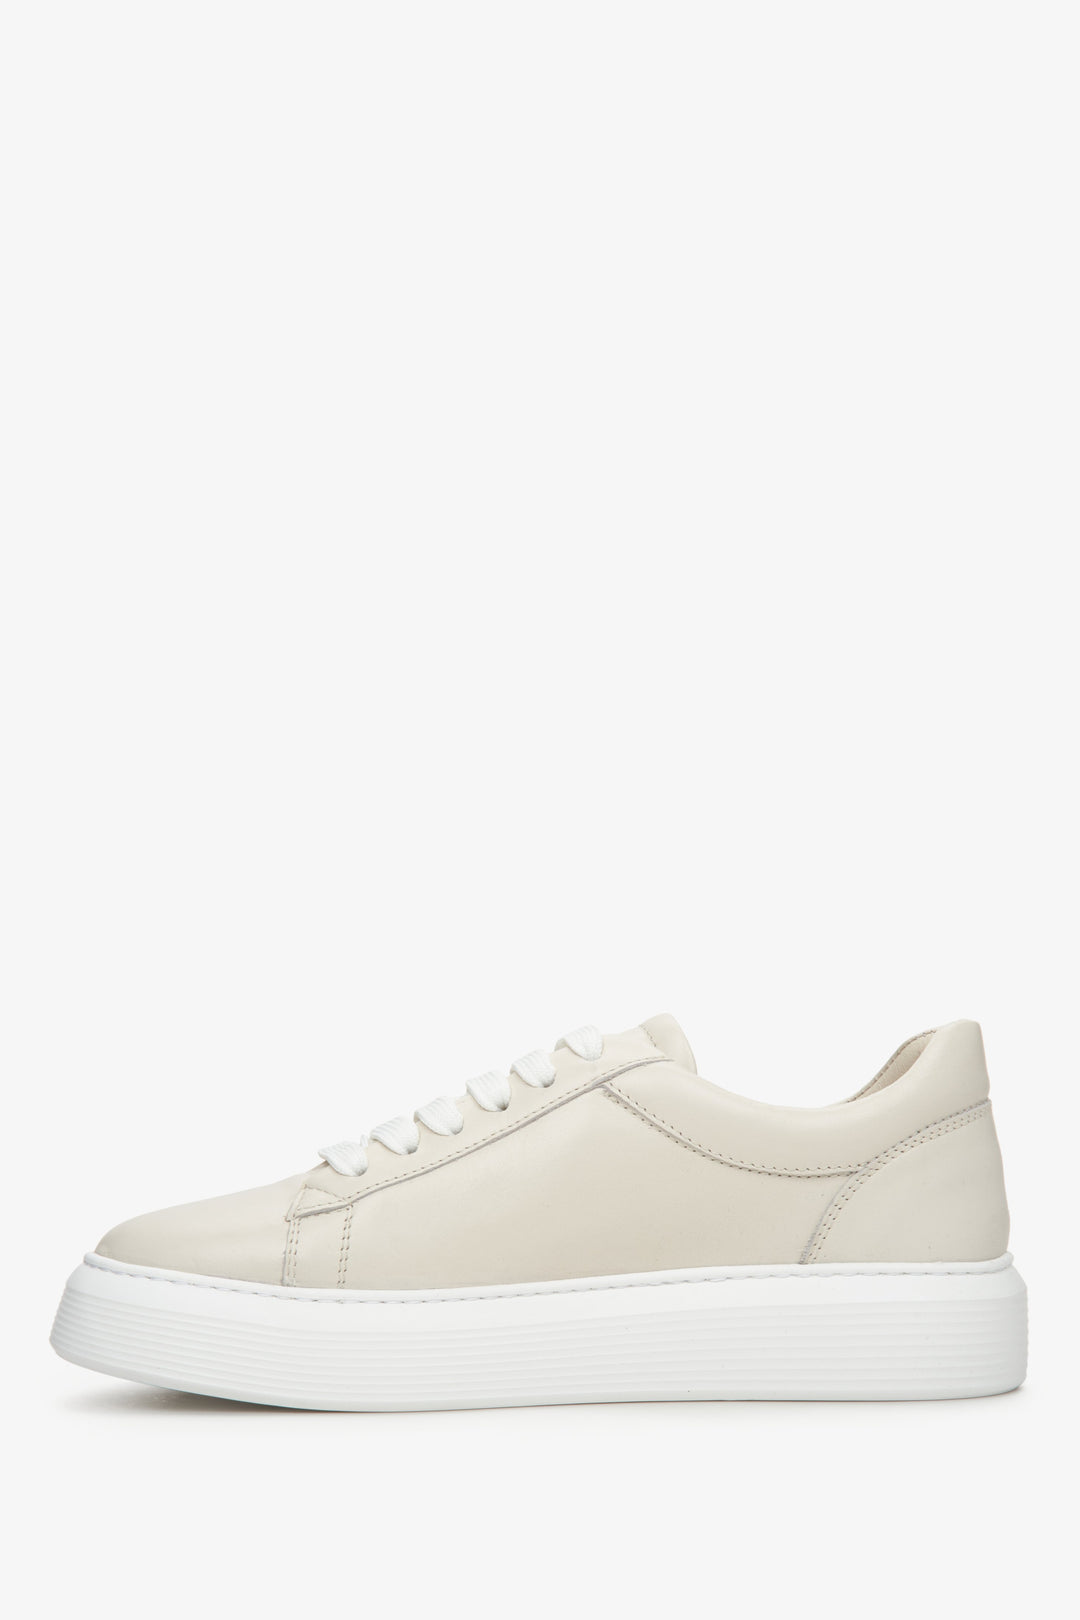 Estro women's leather sneakers with laces for fall - shoe profile.